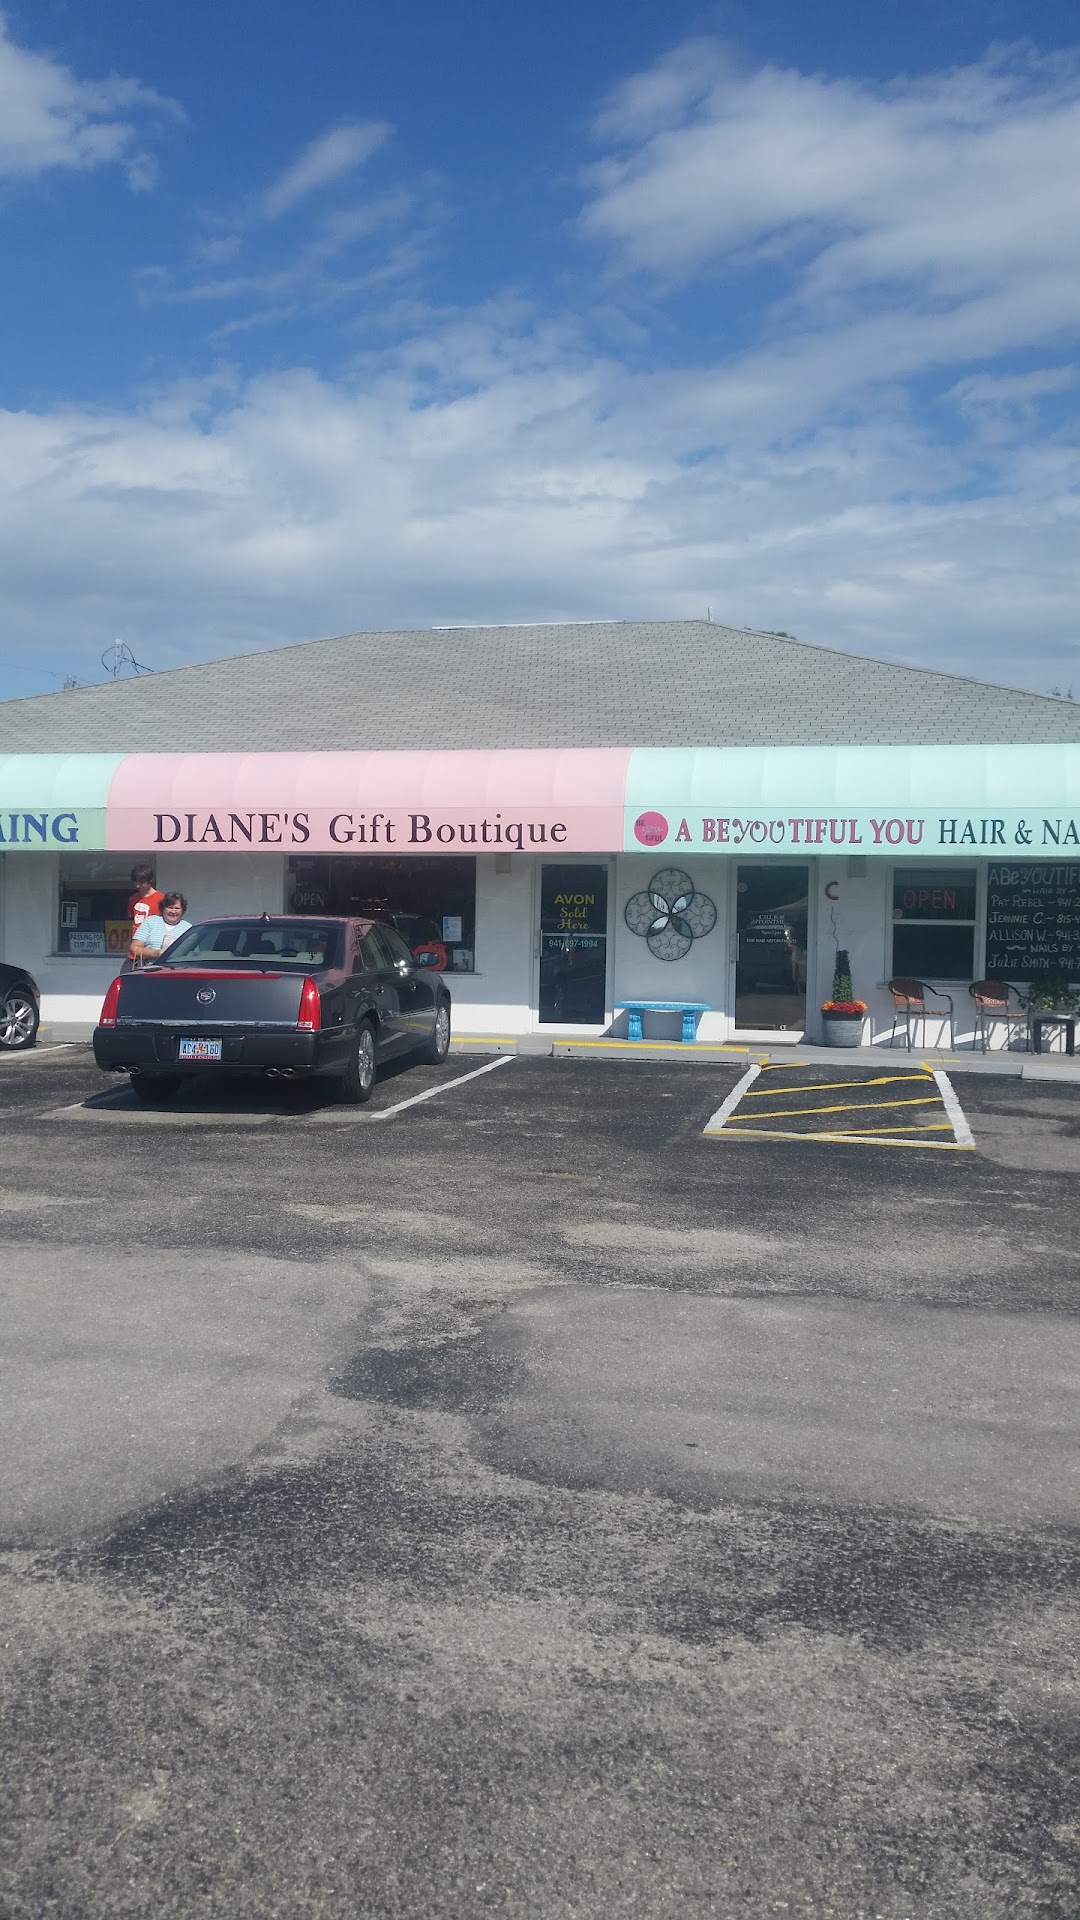 Diane’s Gift Boutique